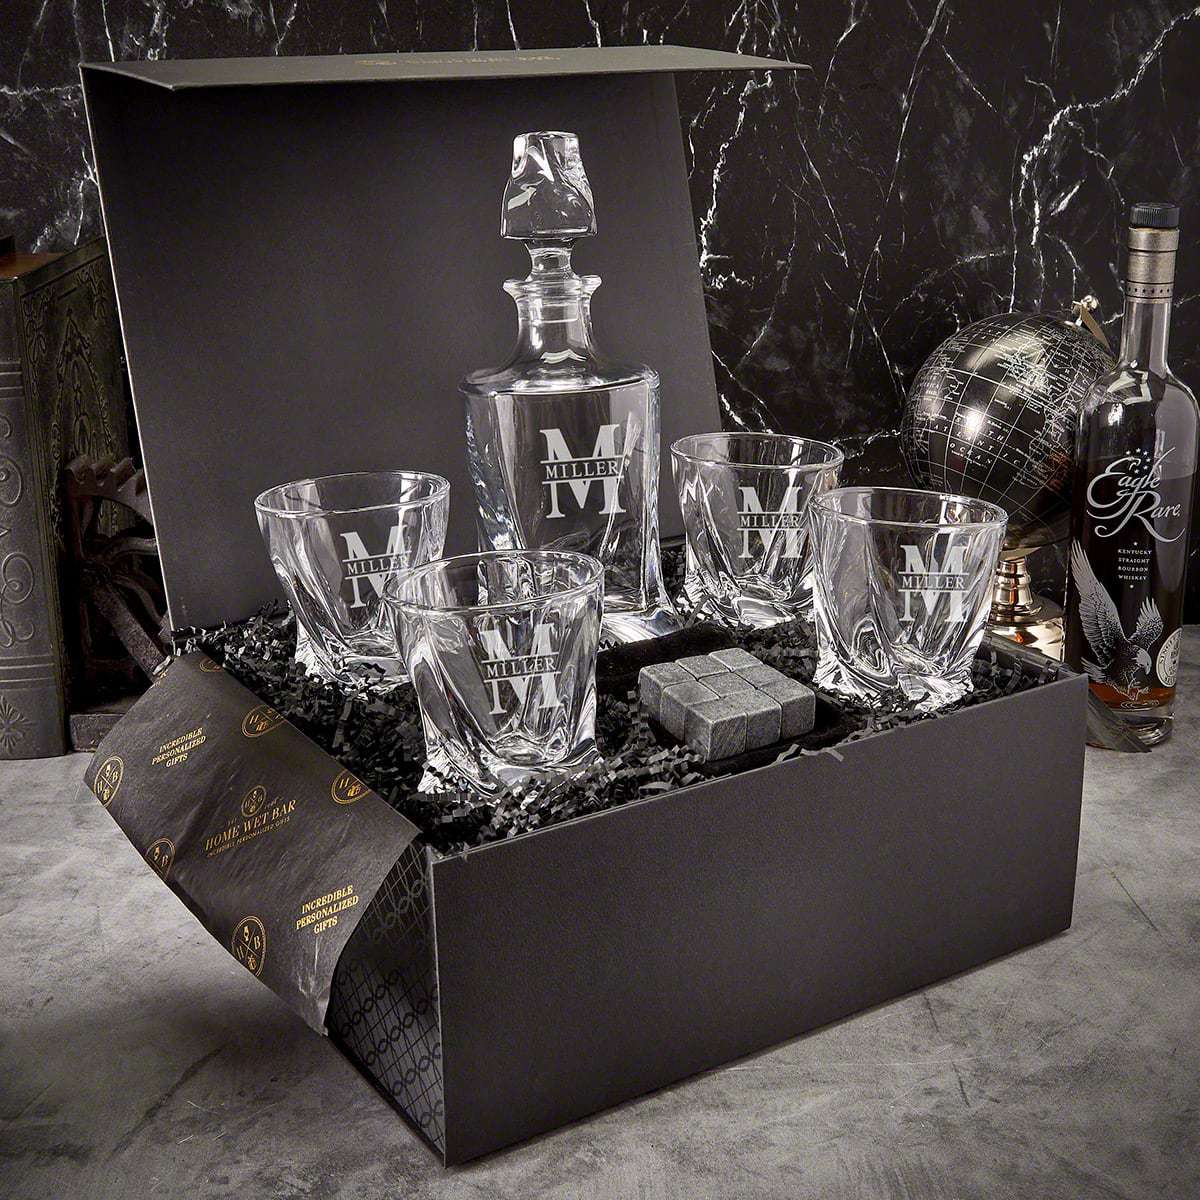 Personalized Whiskey Decanter with Rocks Glasses & Luxury Box Set - 7pc 